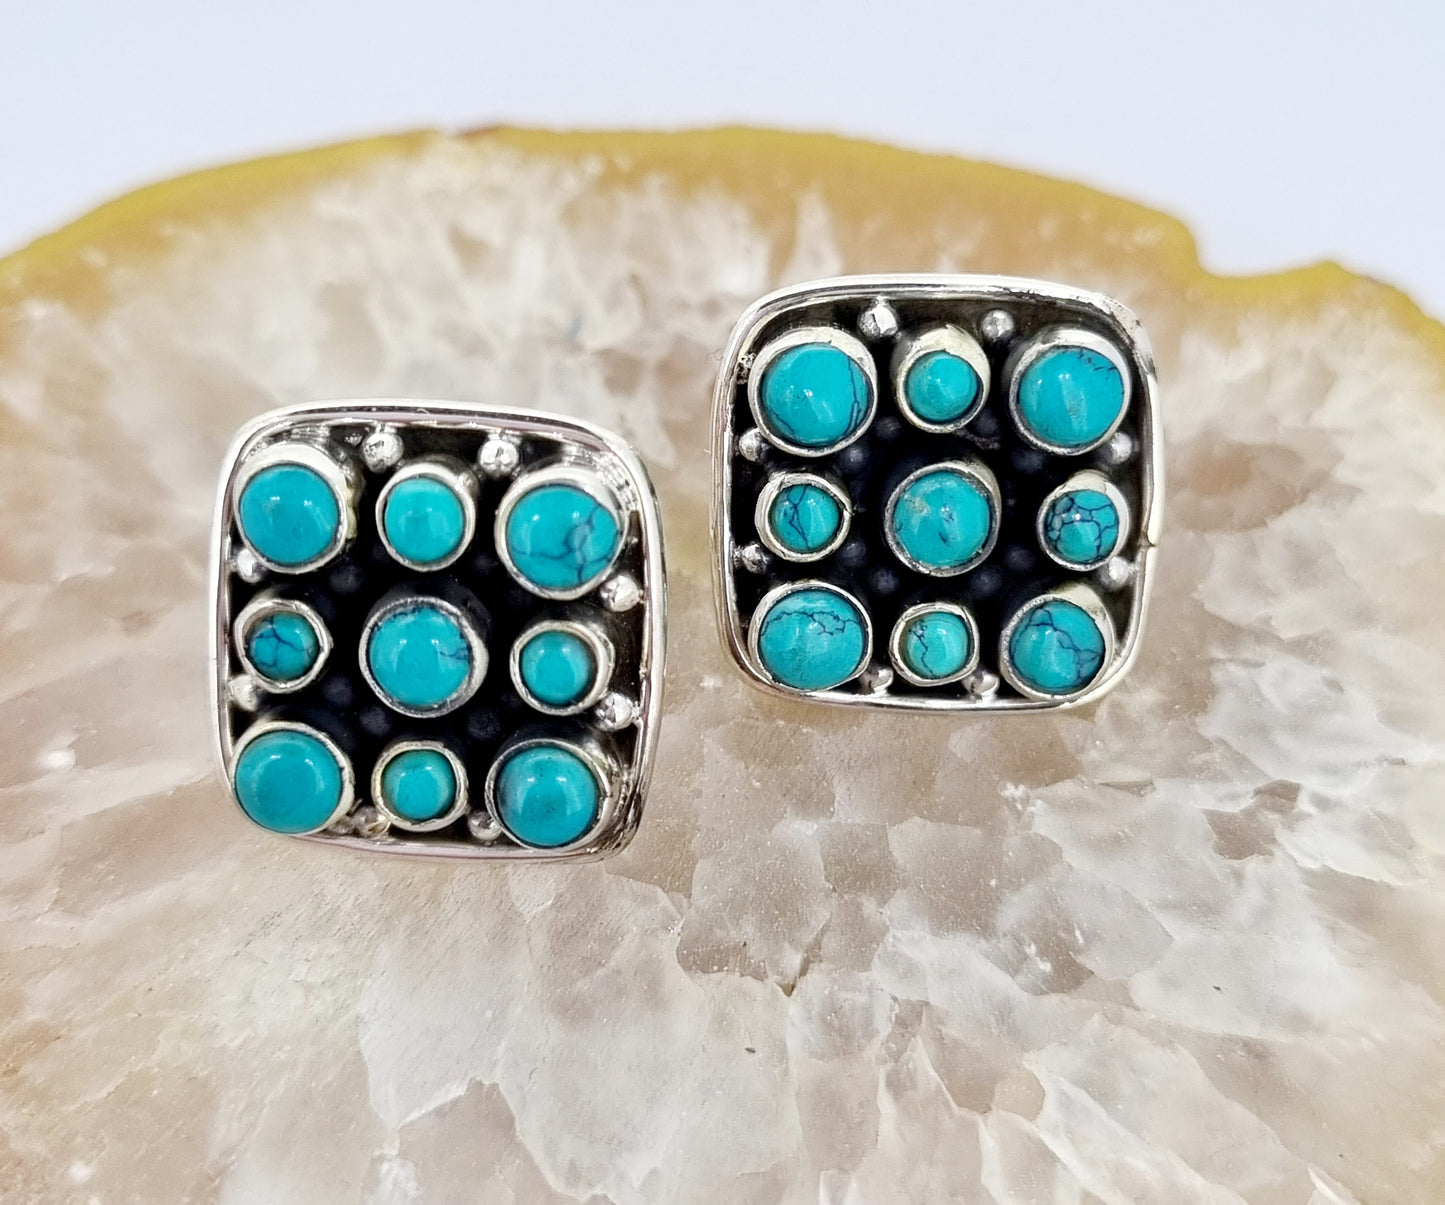 Universal Turquoise Is Said To Bring You Good Luck. 9 (Symbol Of Enlightenment) Sacred Gems Are Uniquely Placed In These Little Ripper 925 Sterling Silver Studs.